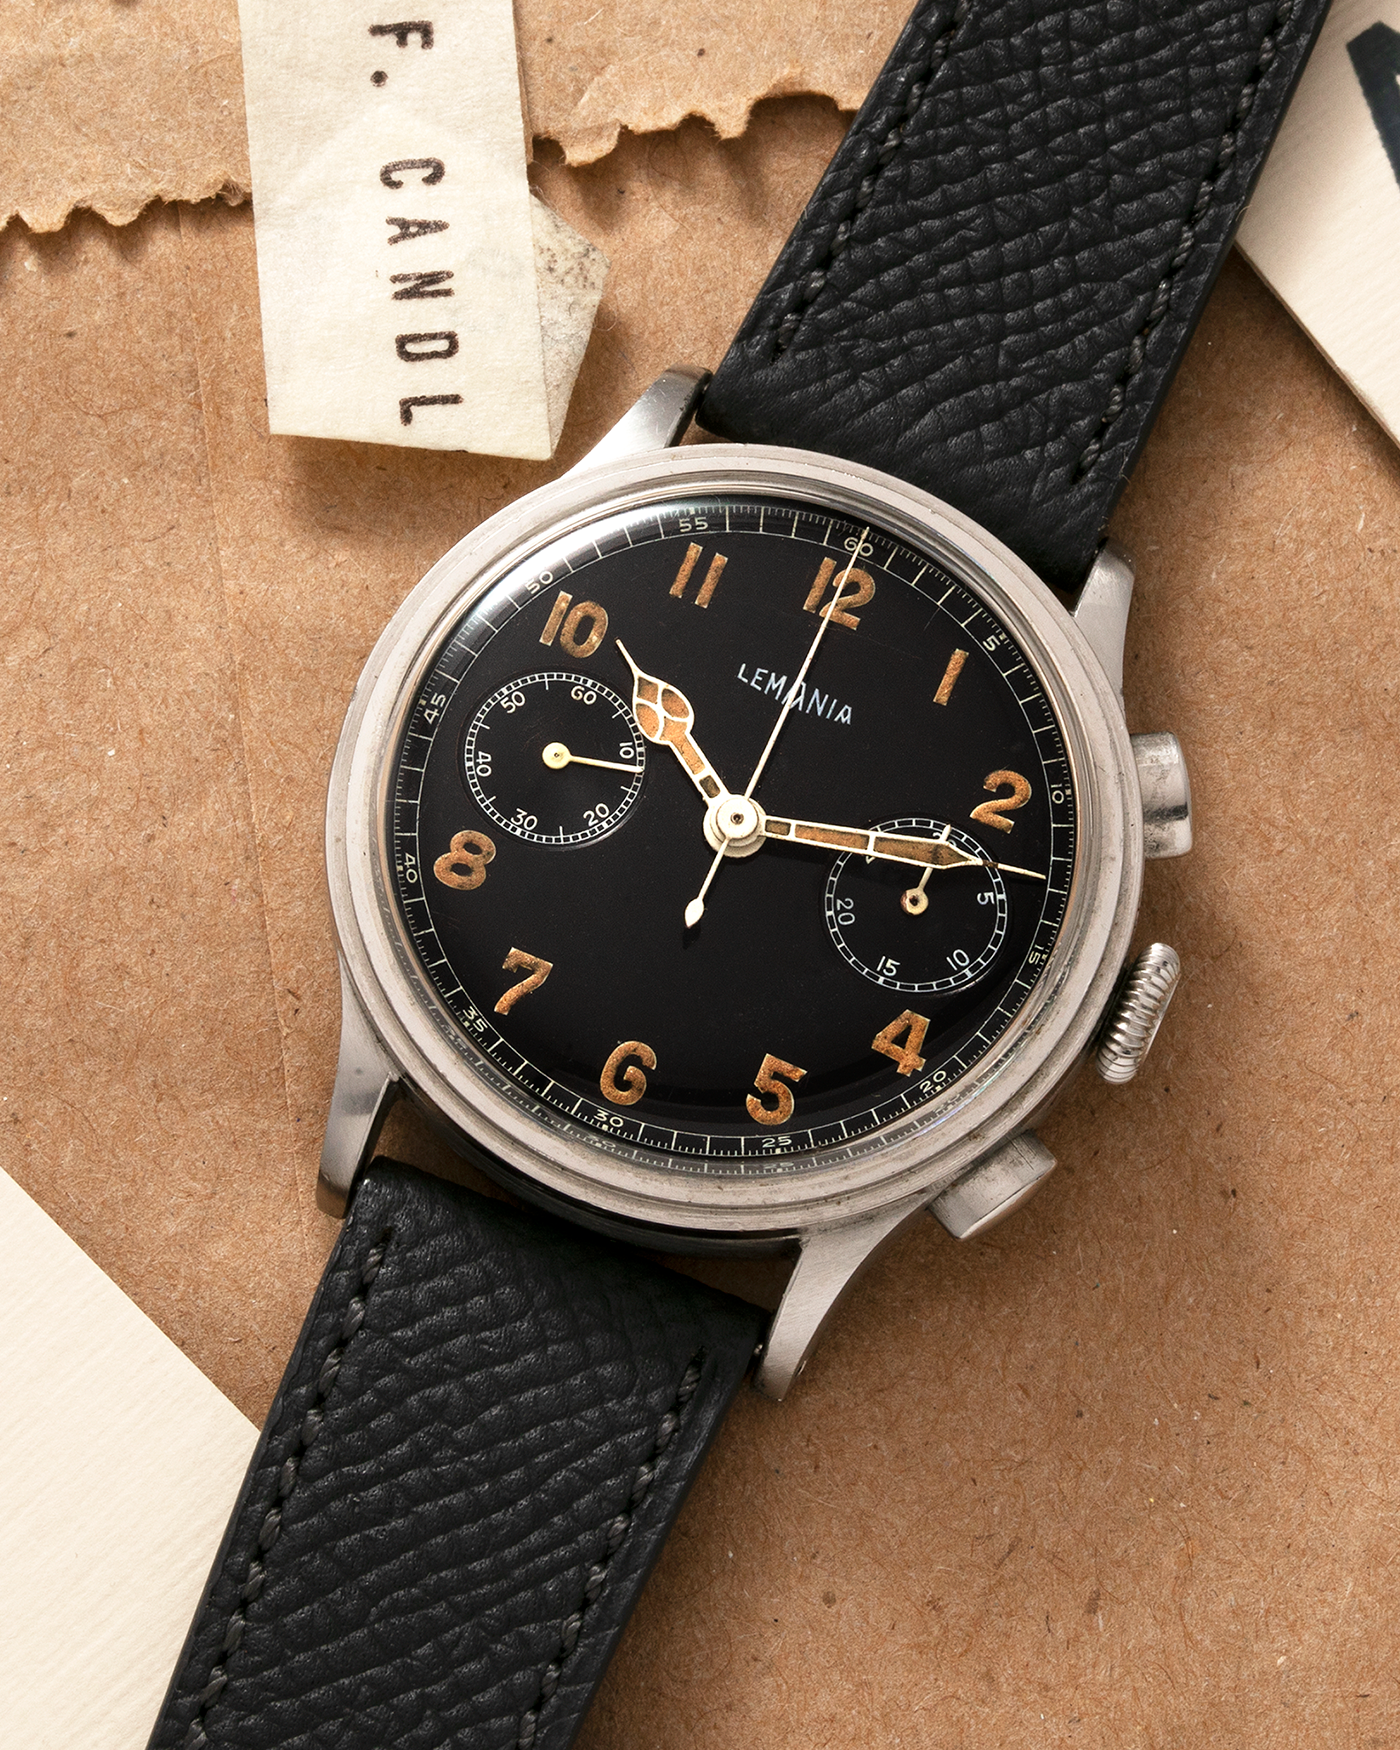 Brand: Lemania Year: 1940’s Model: 15TL Material: Stainless Steel Movement: Lemania Cal. 15TL, Manual-Winding Case Diameter: 38mm Strap: Molequin Anthracite Grey Textured Calf Leather Strap